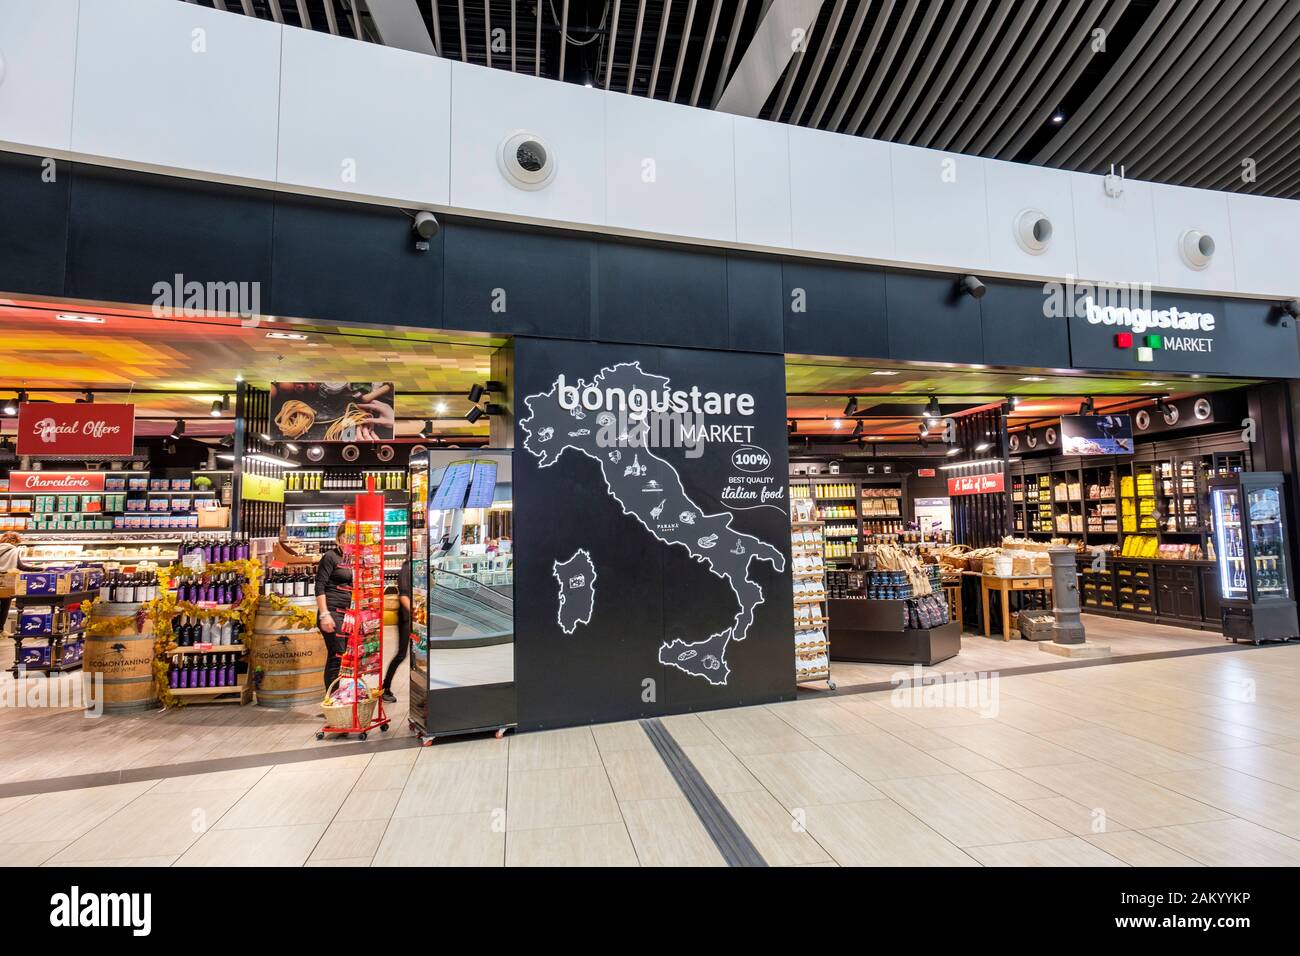 Airport terminal shopping, Bongustare Market store at Rome Fiumicino Airport departure lounge, Rome, Italy Stock Photo